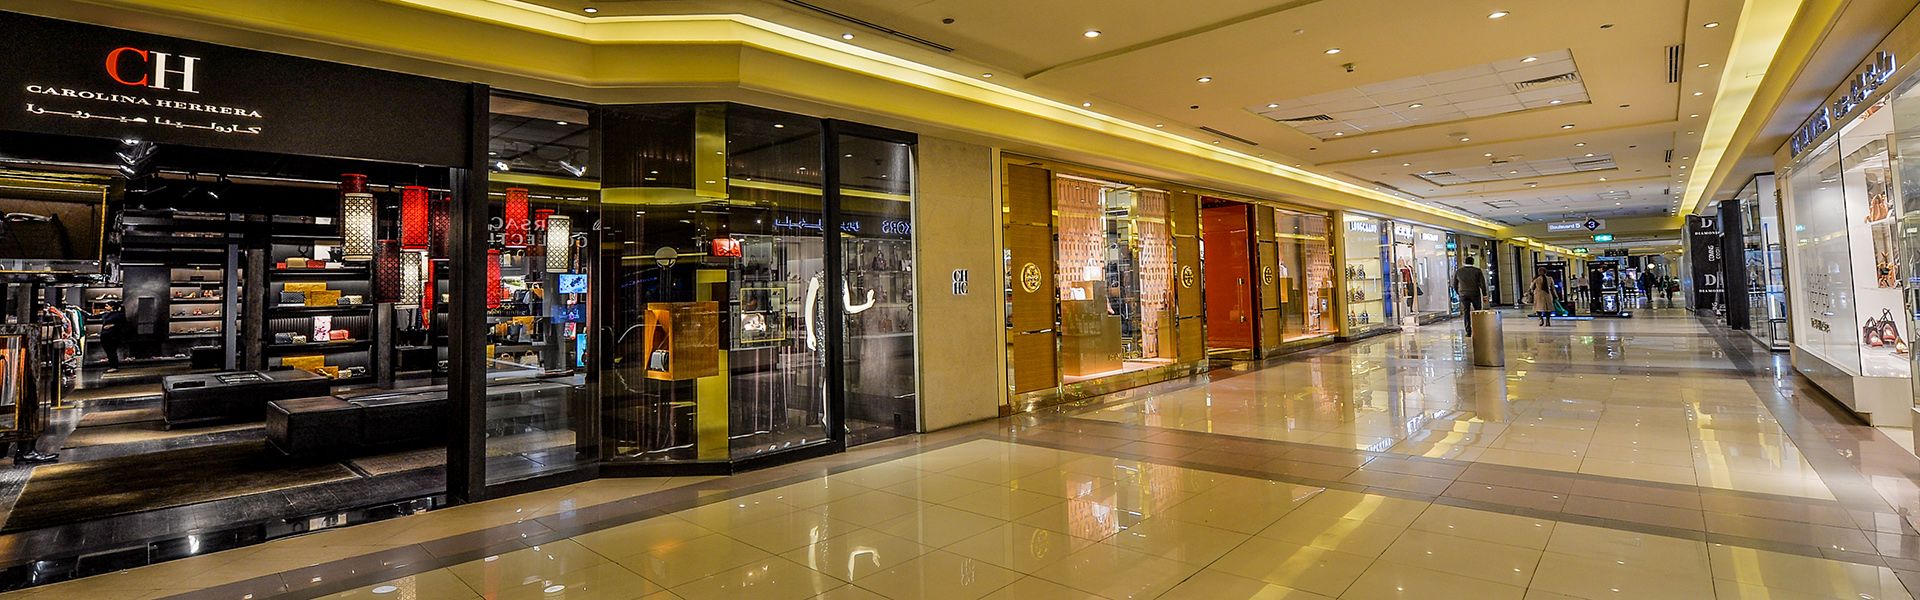 hollister egypt branches off 53% - www 